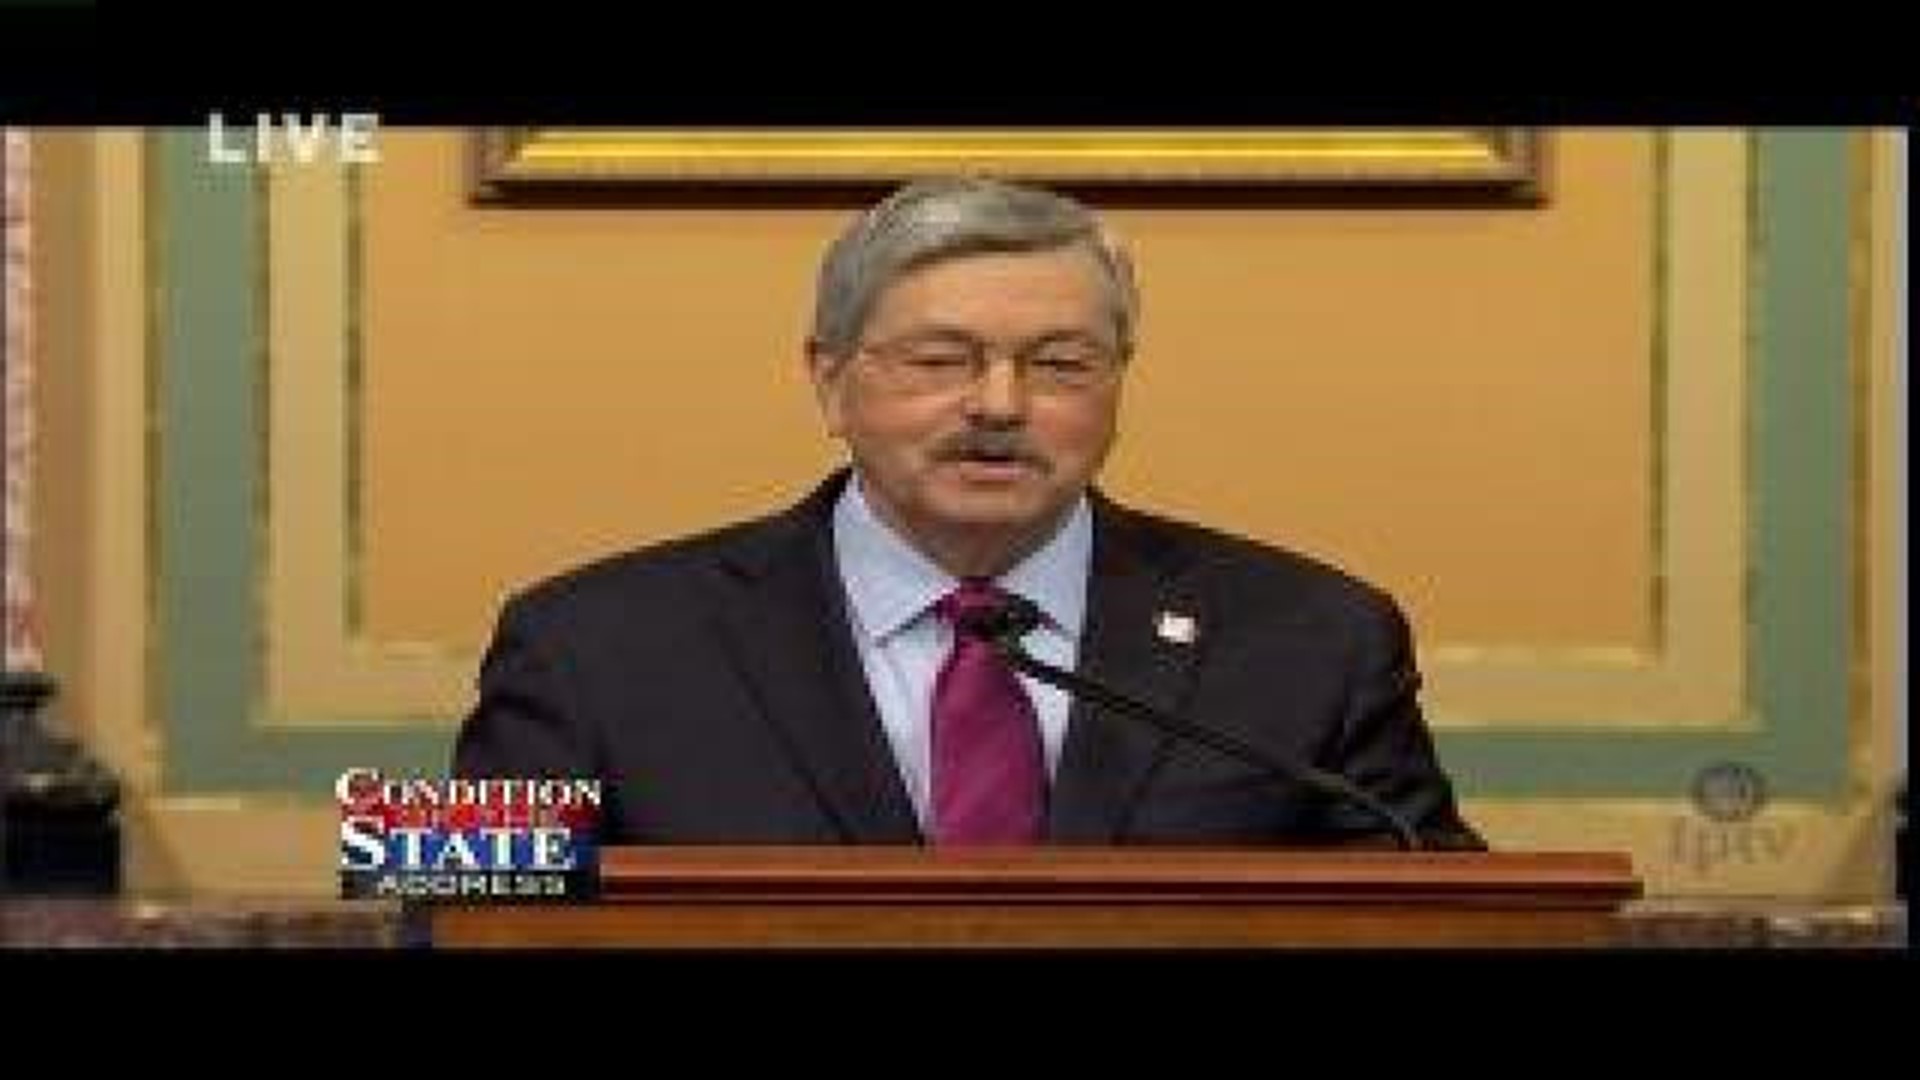 Gov Terry Branstad 2014 Condition of the State - Part 2 of 2